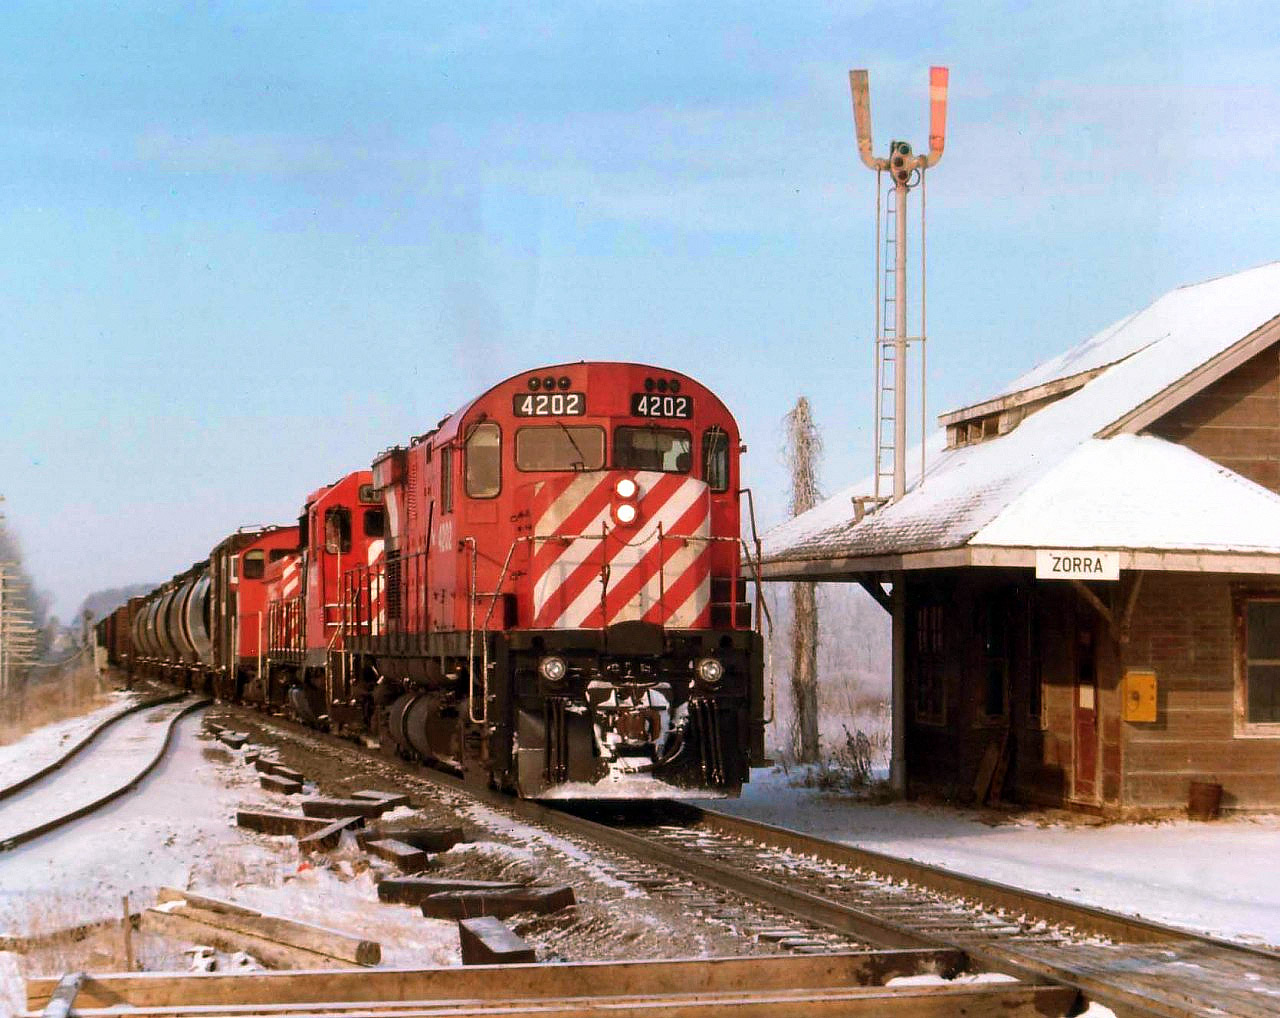 On a day not quite spring, eastbound train #52, with CP 4202, 5022 and 6700 rolls past the old Zorra station. The track on the left veers off to the current La farge cement plant, and off to the right (out of sight) the line to St. Marys existed; now only a spur to a gravel operation.